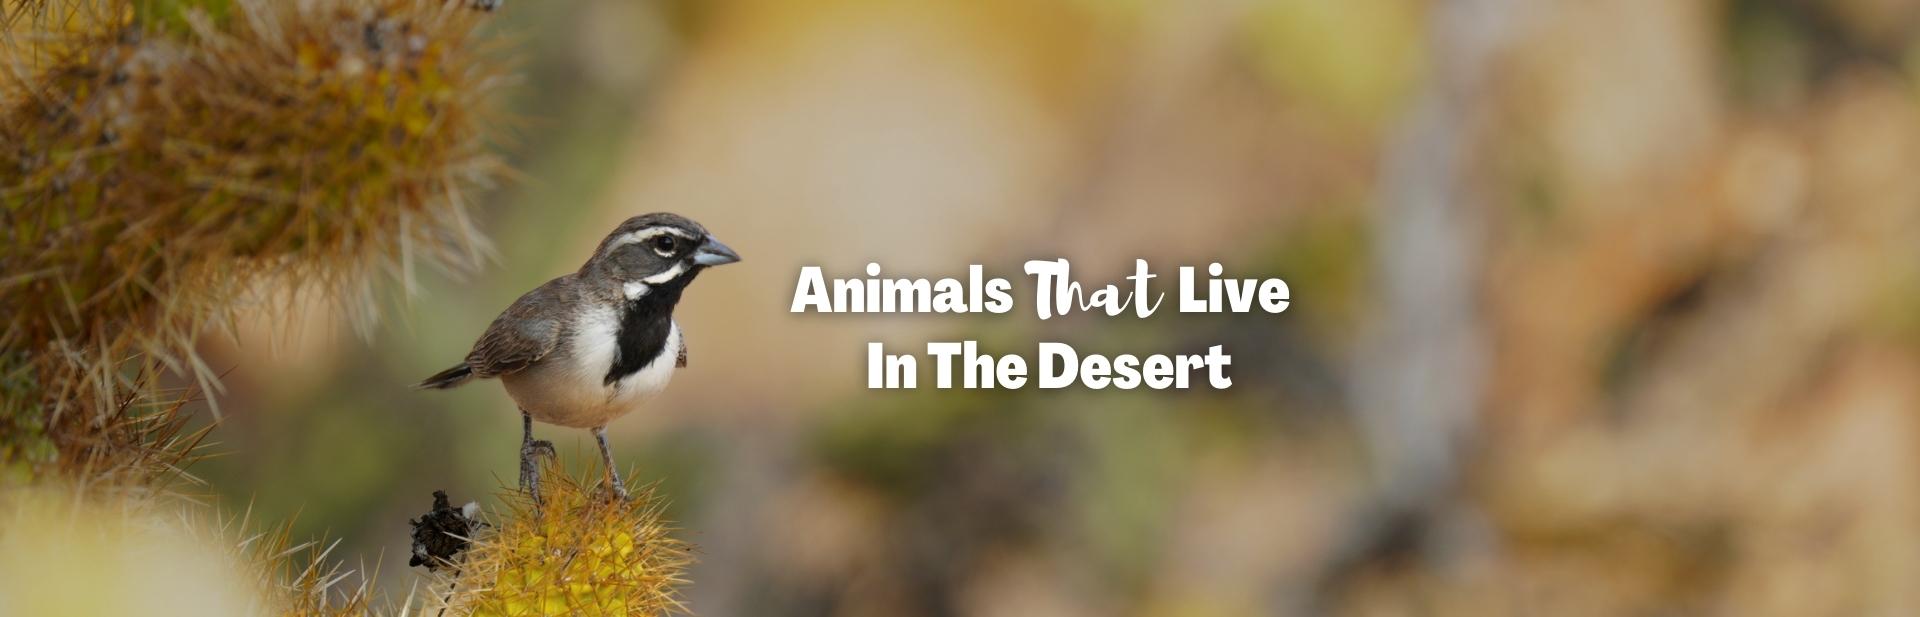 22 Animals That Live in the Desert: How Do They Adapt?